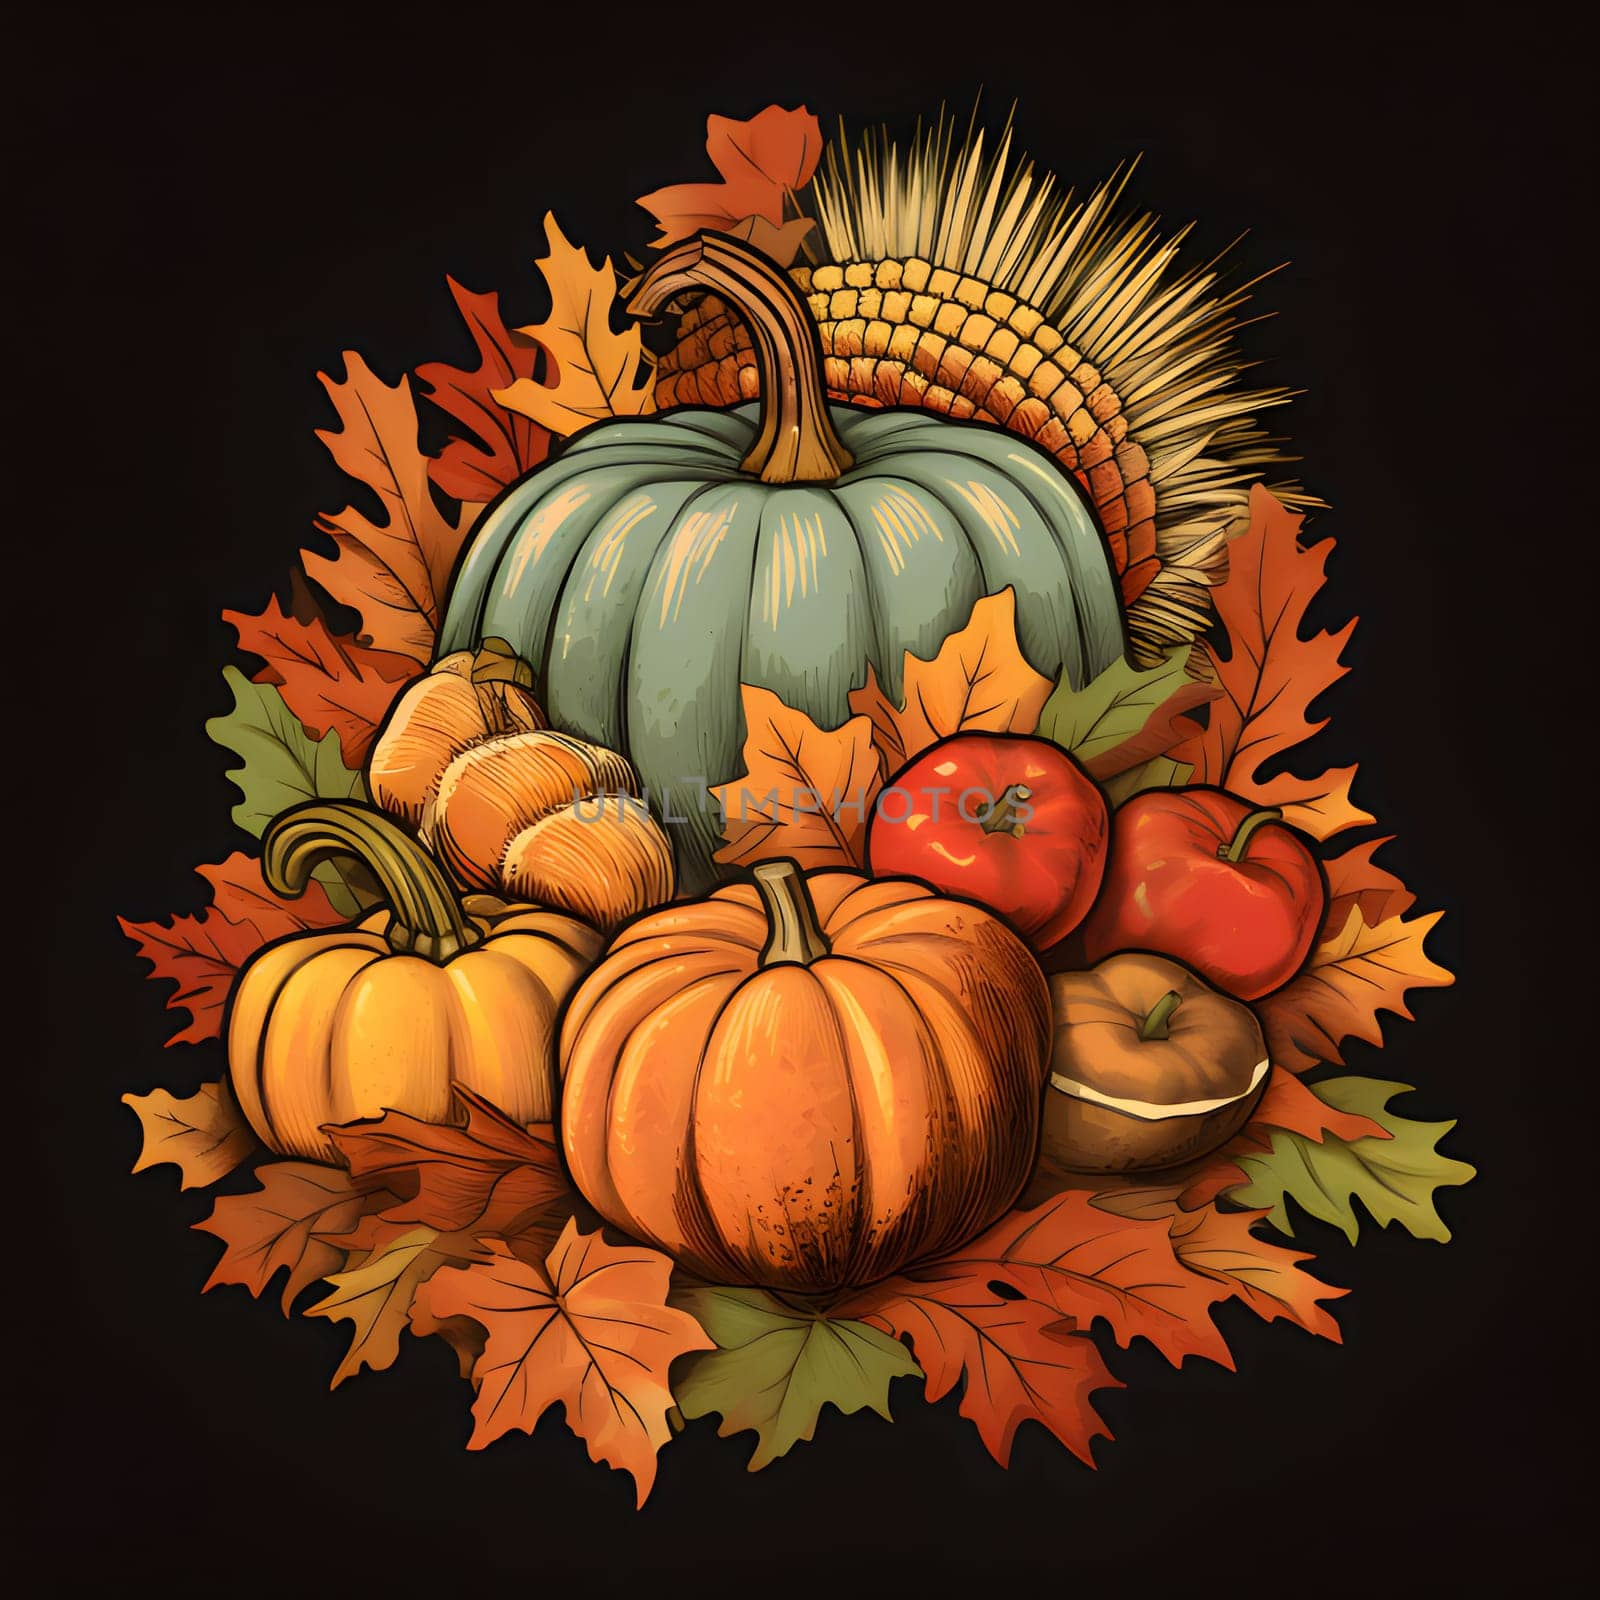 Illustration on black isolated background; pumpkins. tomatoes and autumn leaves. Pumpkin as a dish of thanksgiving for the harvest. An atmosphere of joy and celebration.